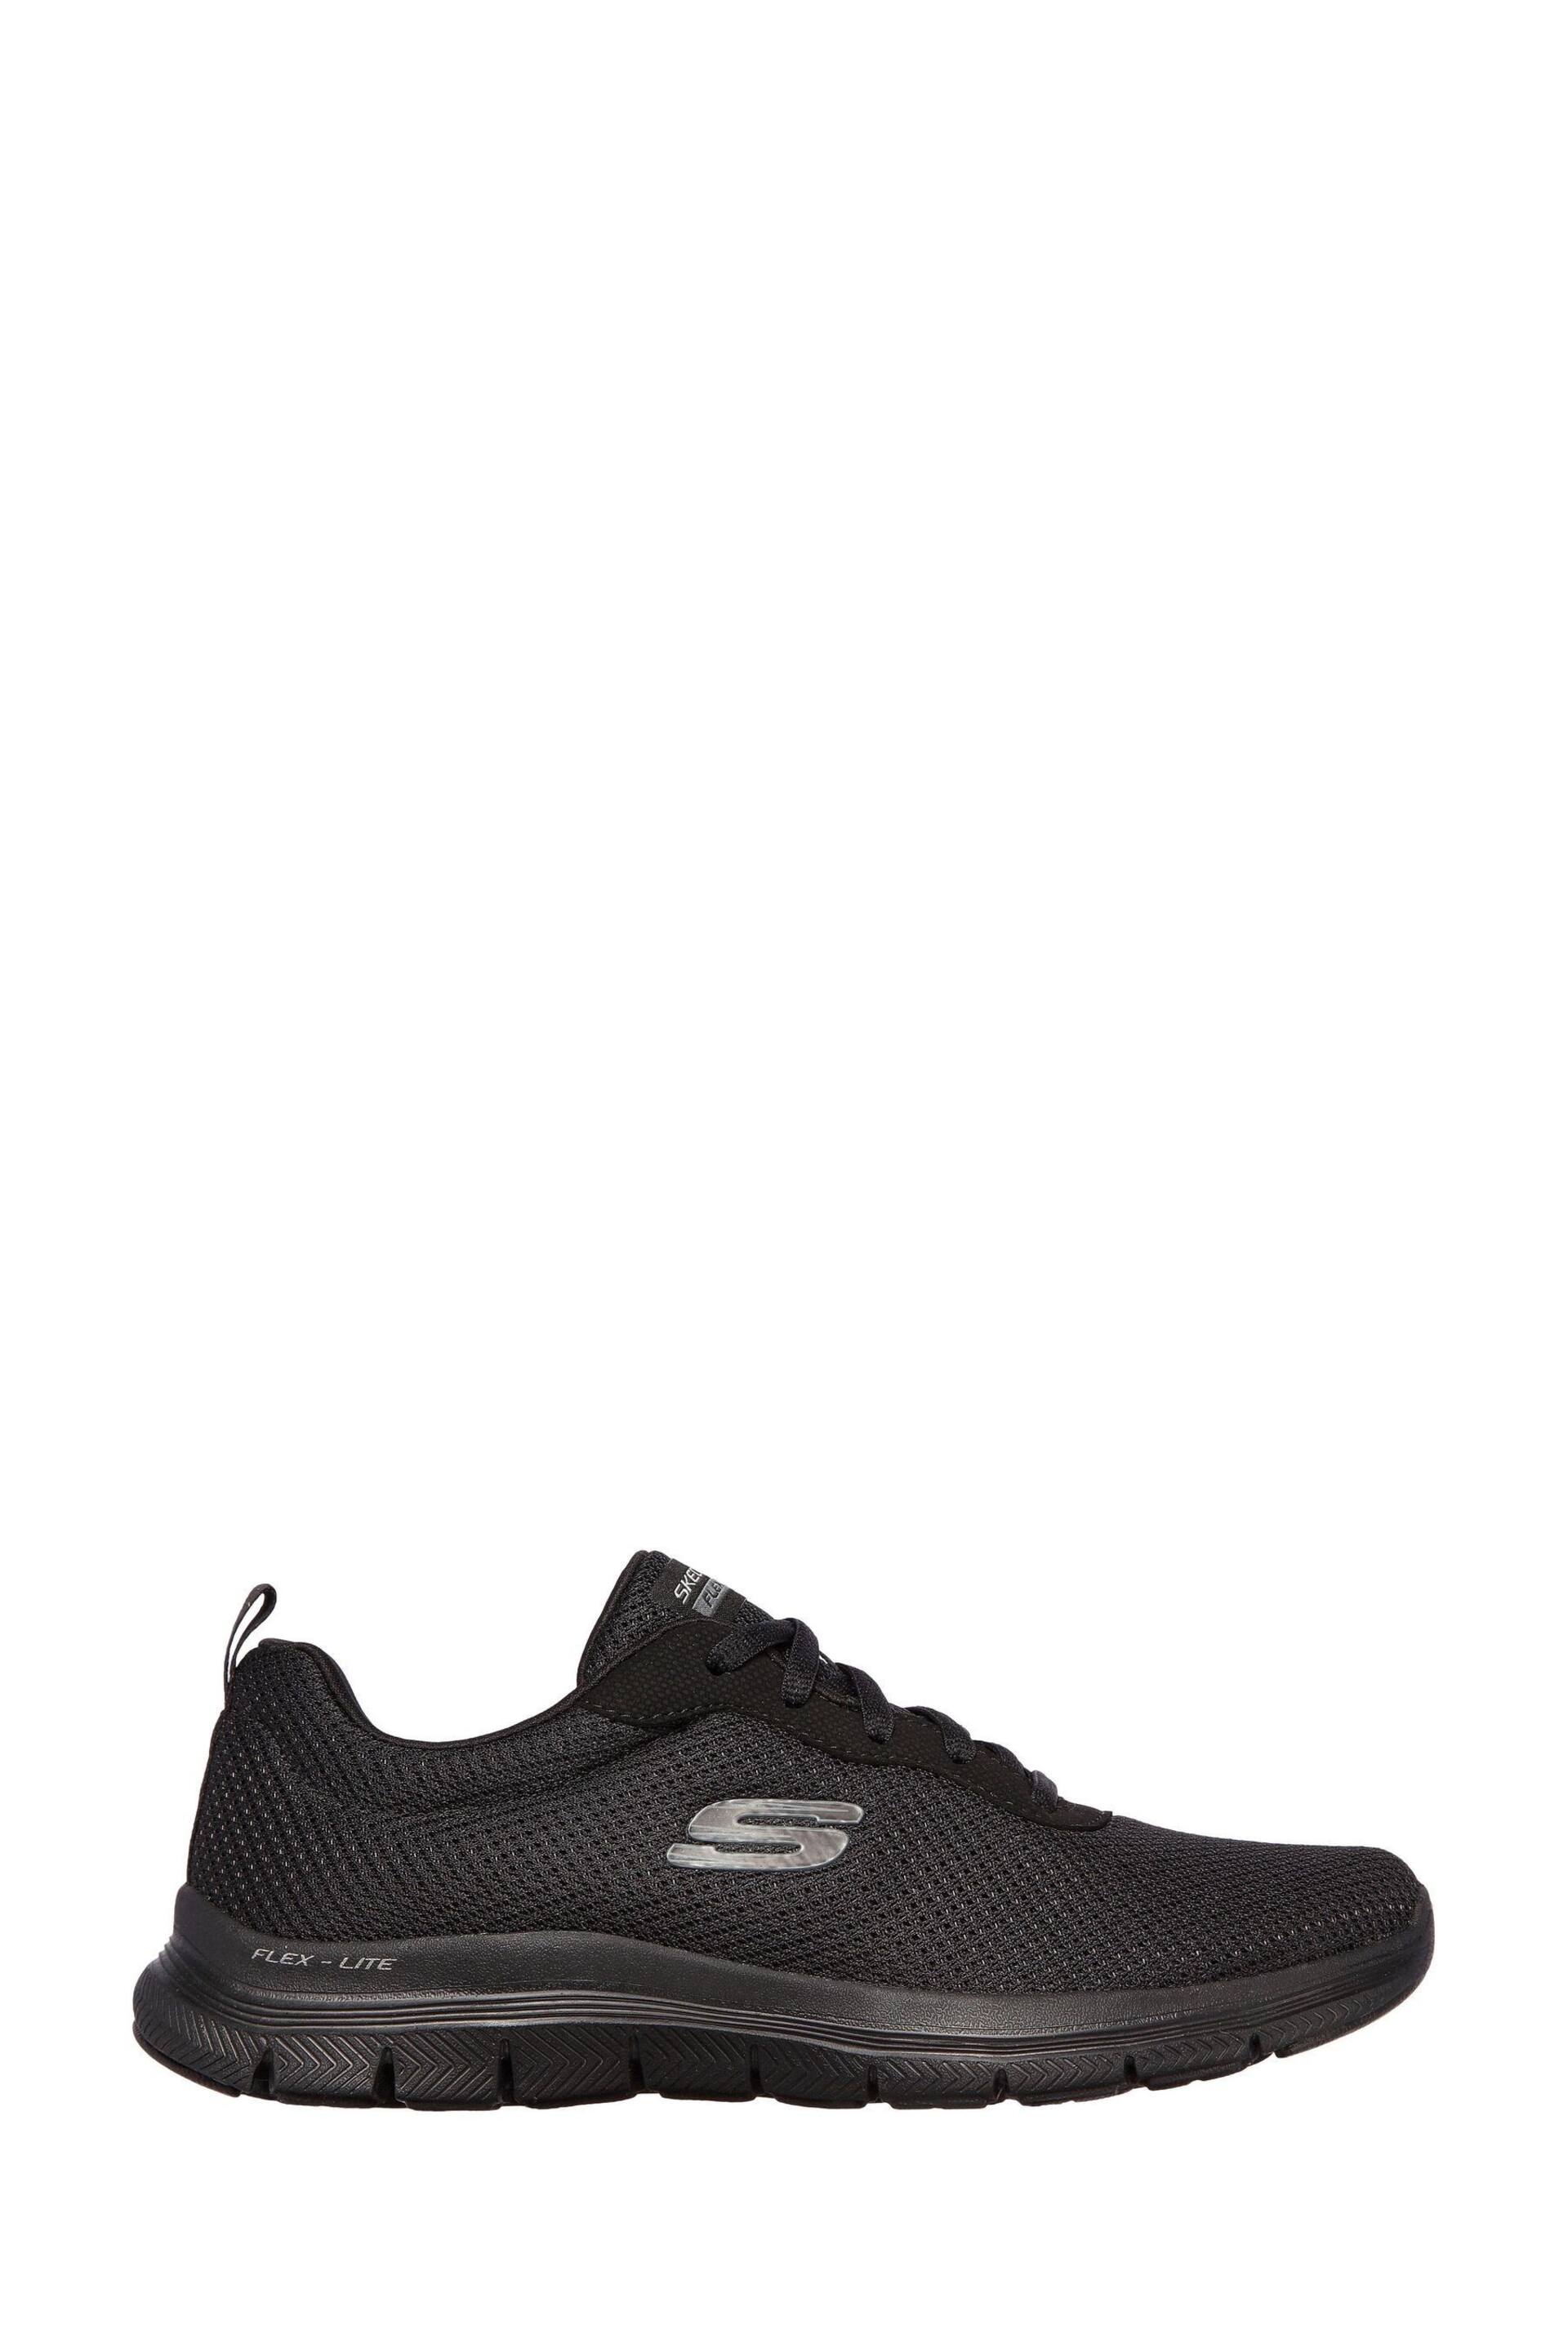 Skechers Black Flex Appeal 4.0 Brilliant View Womens Trainers - Image 1 of 8